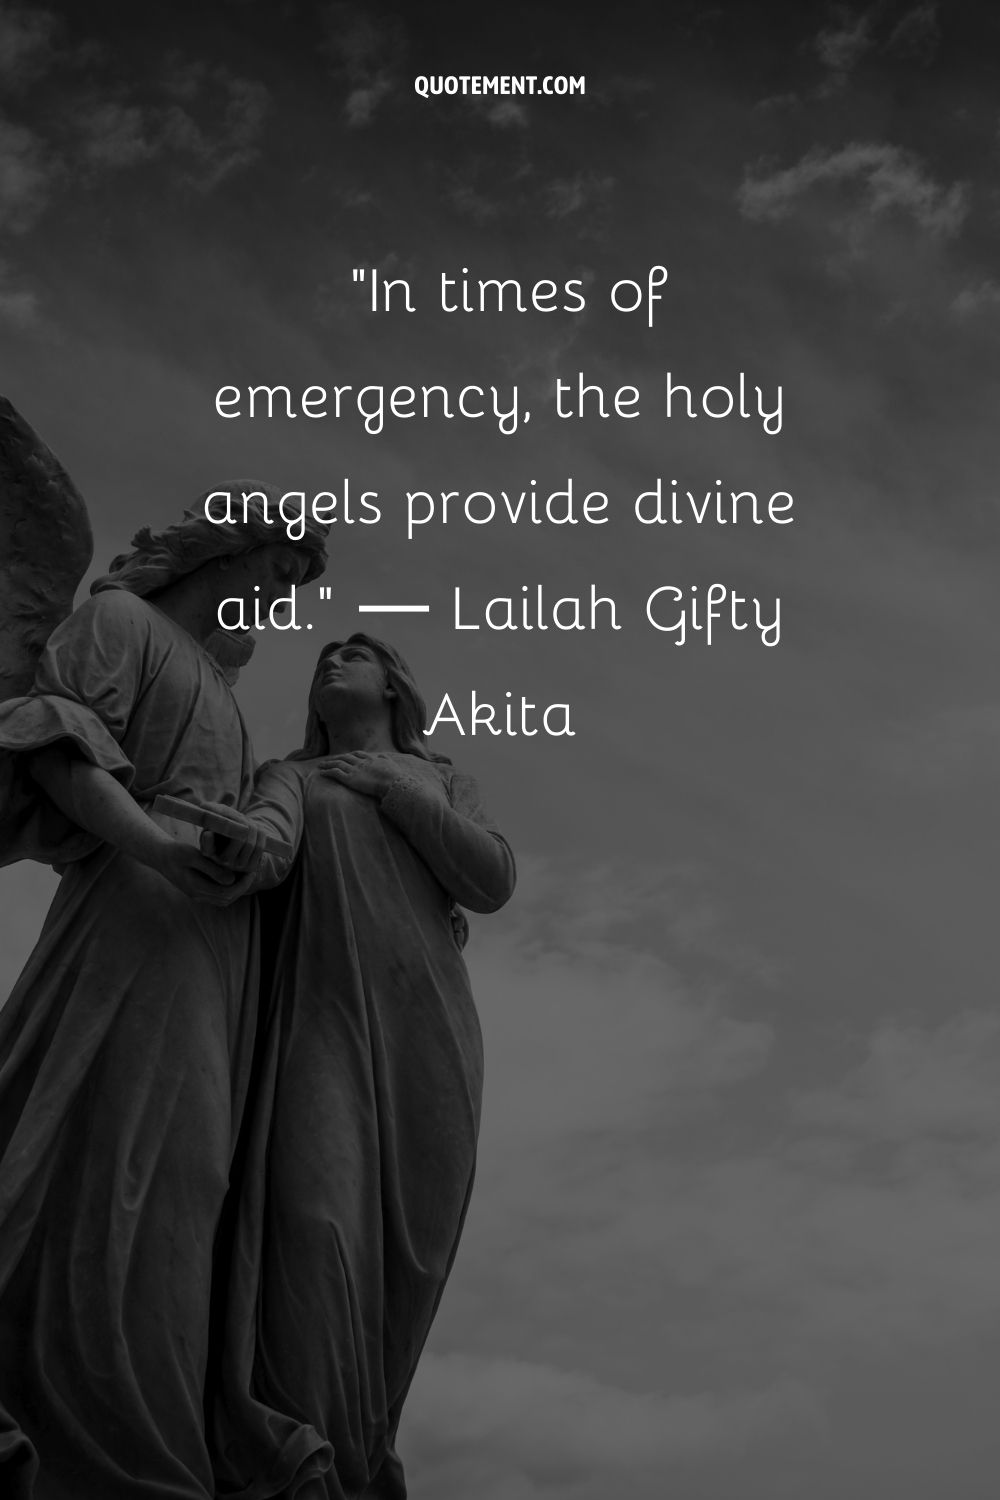 In times of emergency, the holy angels provide divine aid.